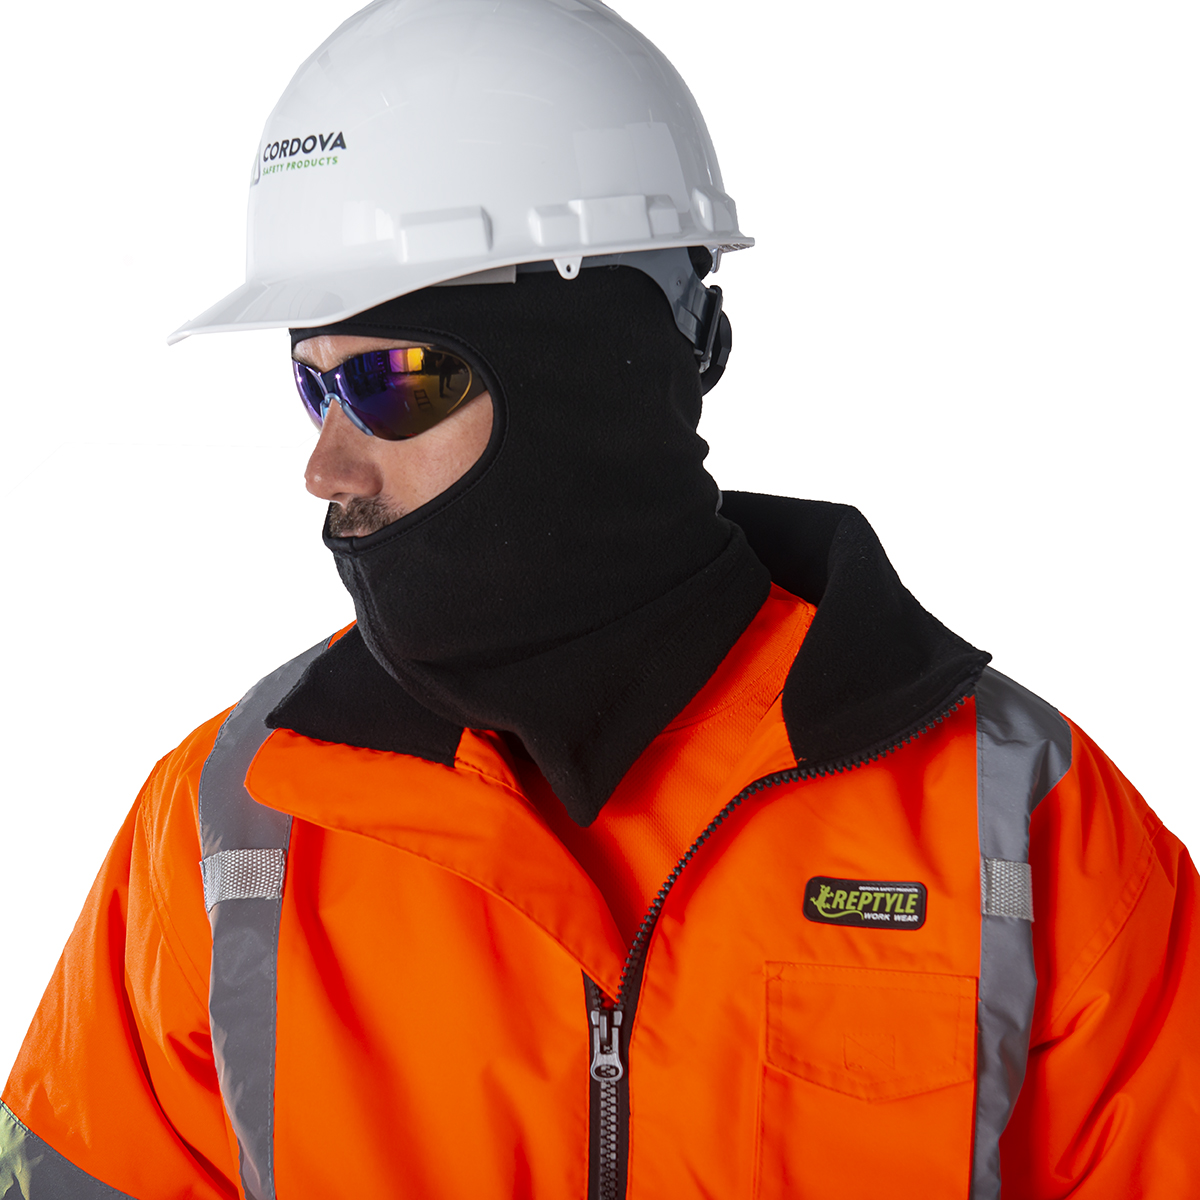 Cordova Safety Products Cordova HL100 Black Pull-On Balaclava/Hard Hat Liner with Reflective Strip on Back